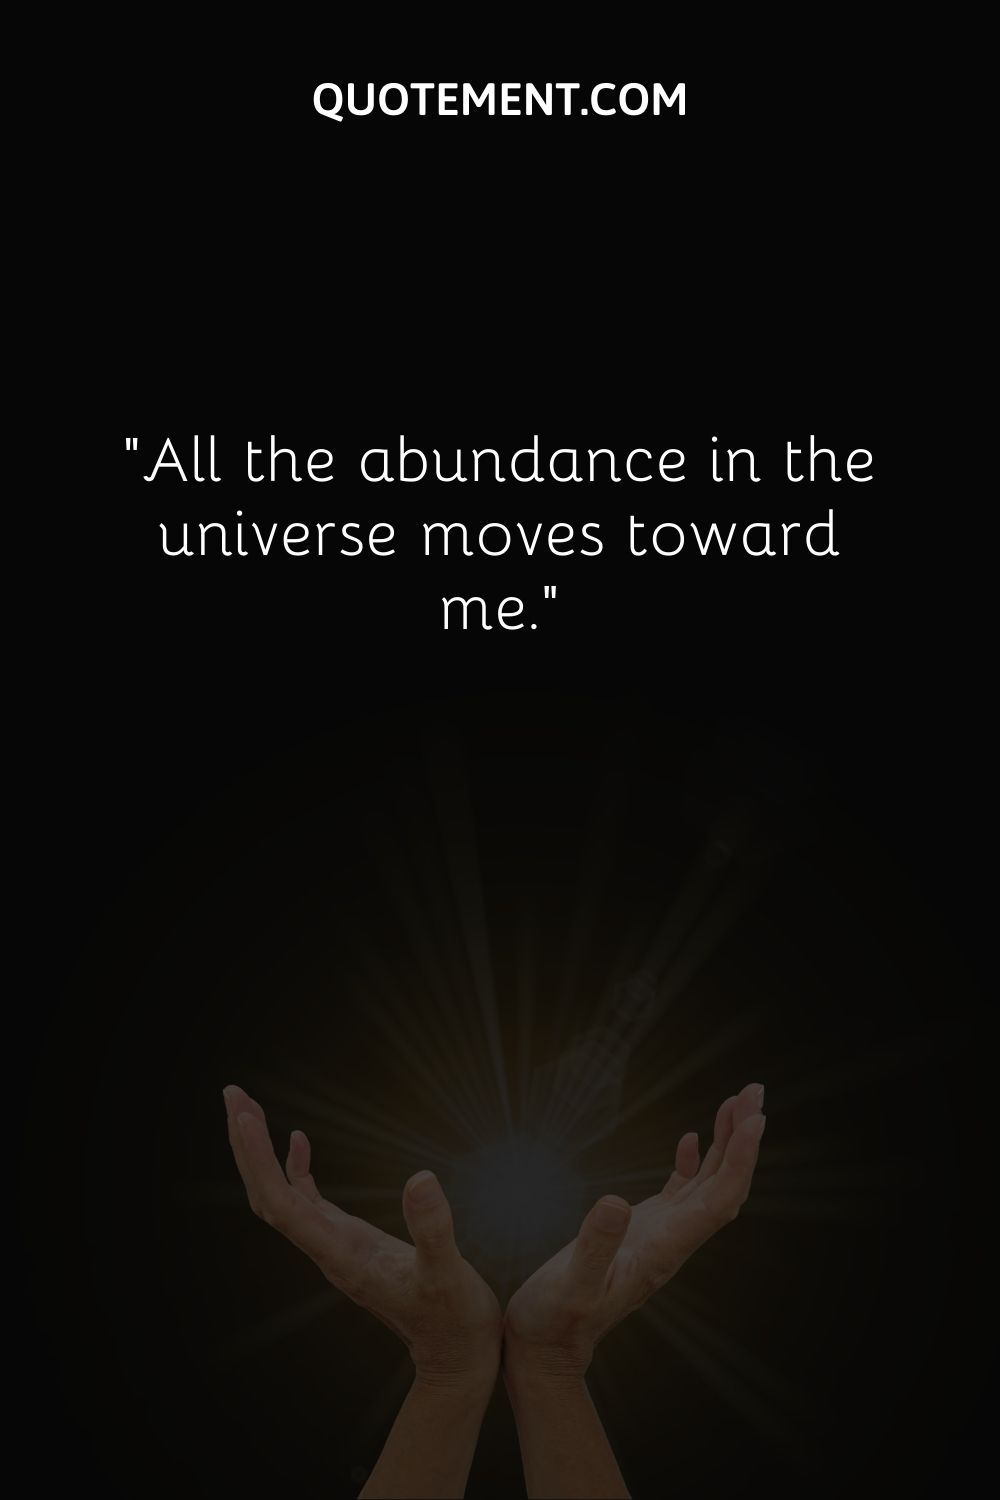 All the abundance in the universe moves toward me